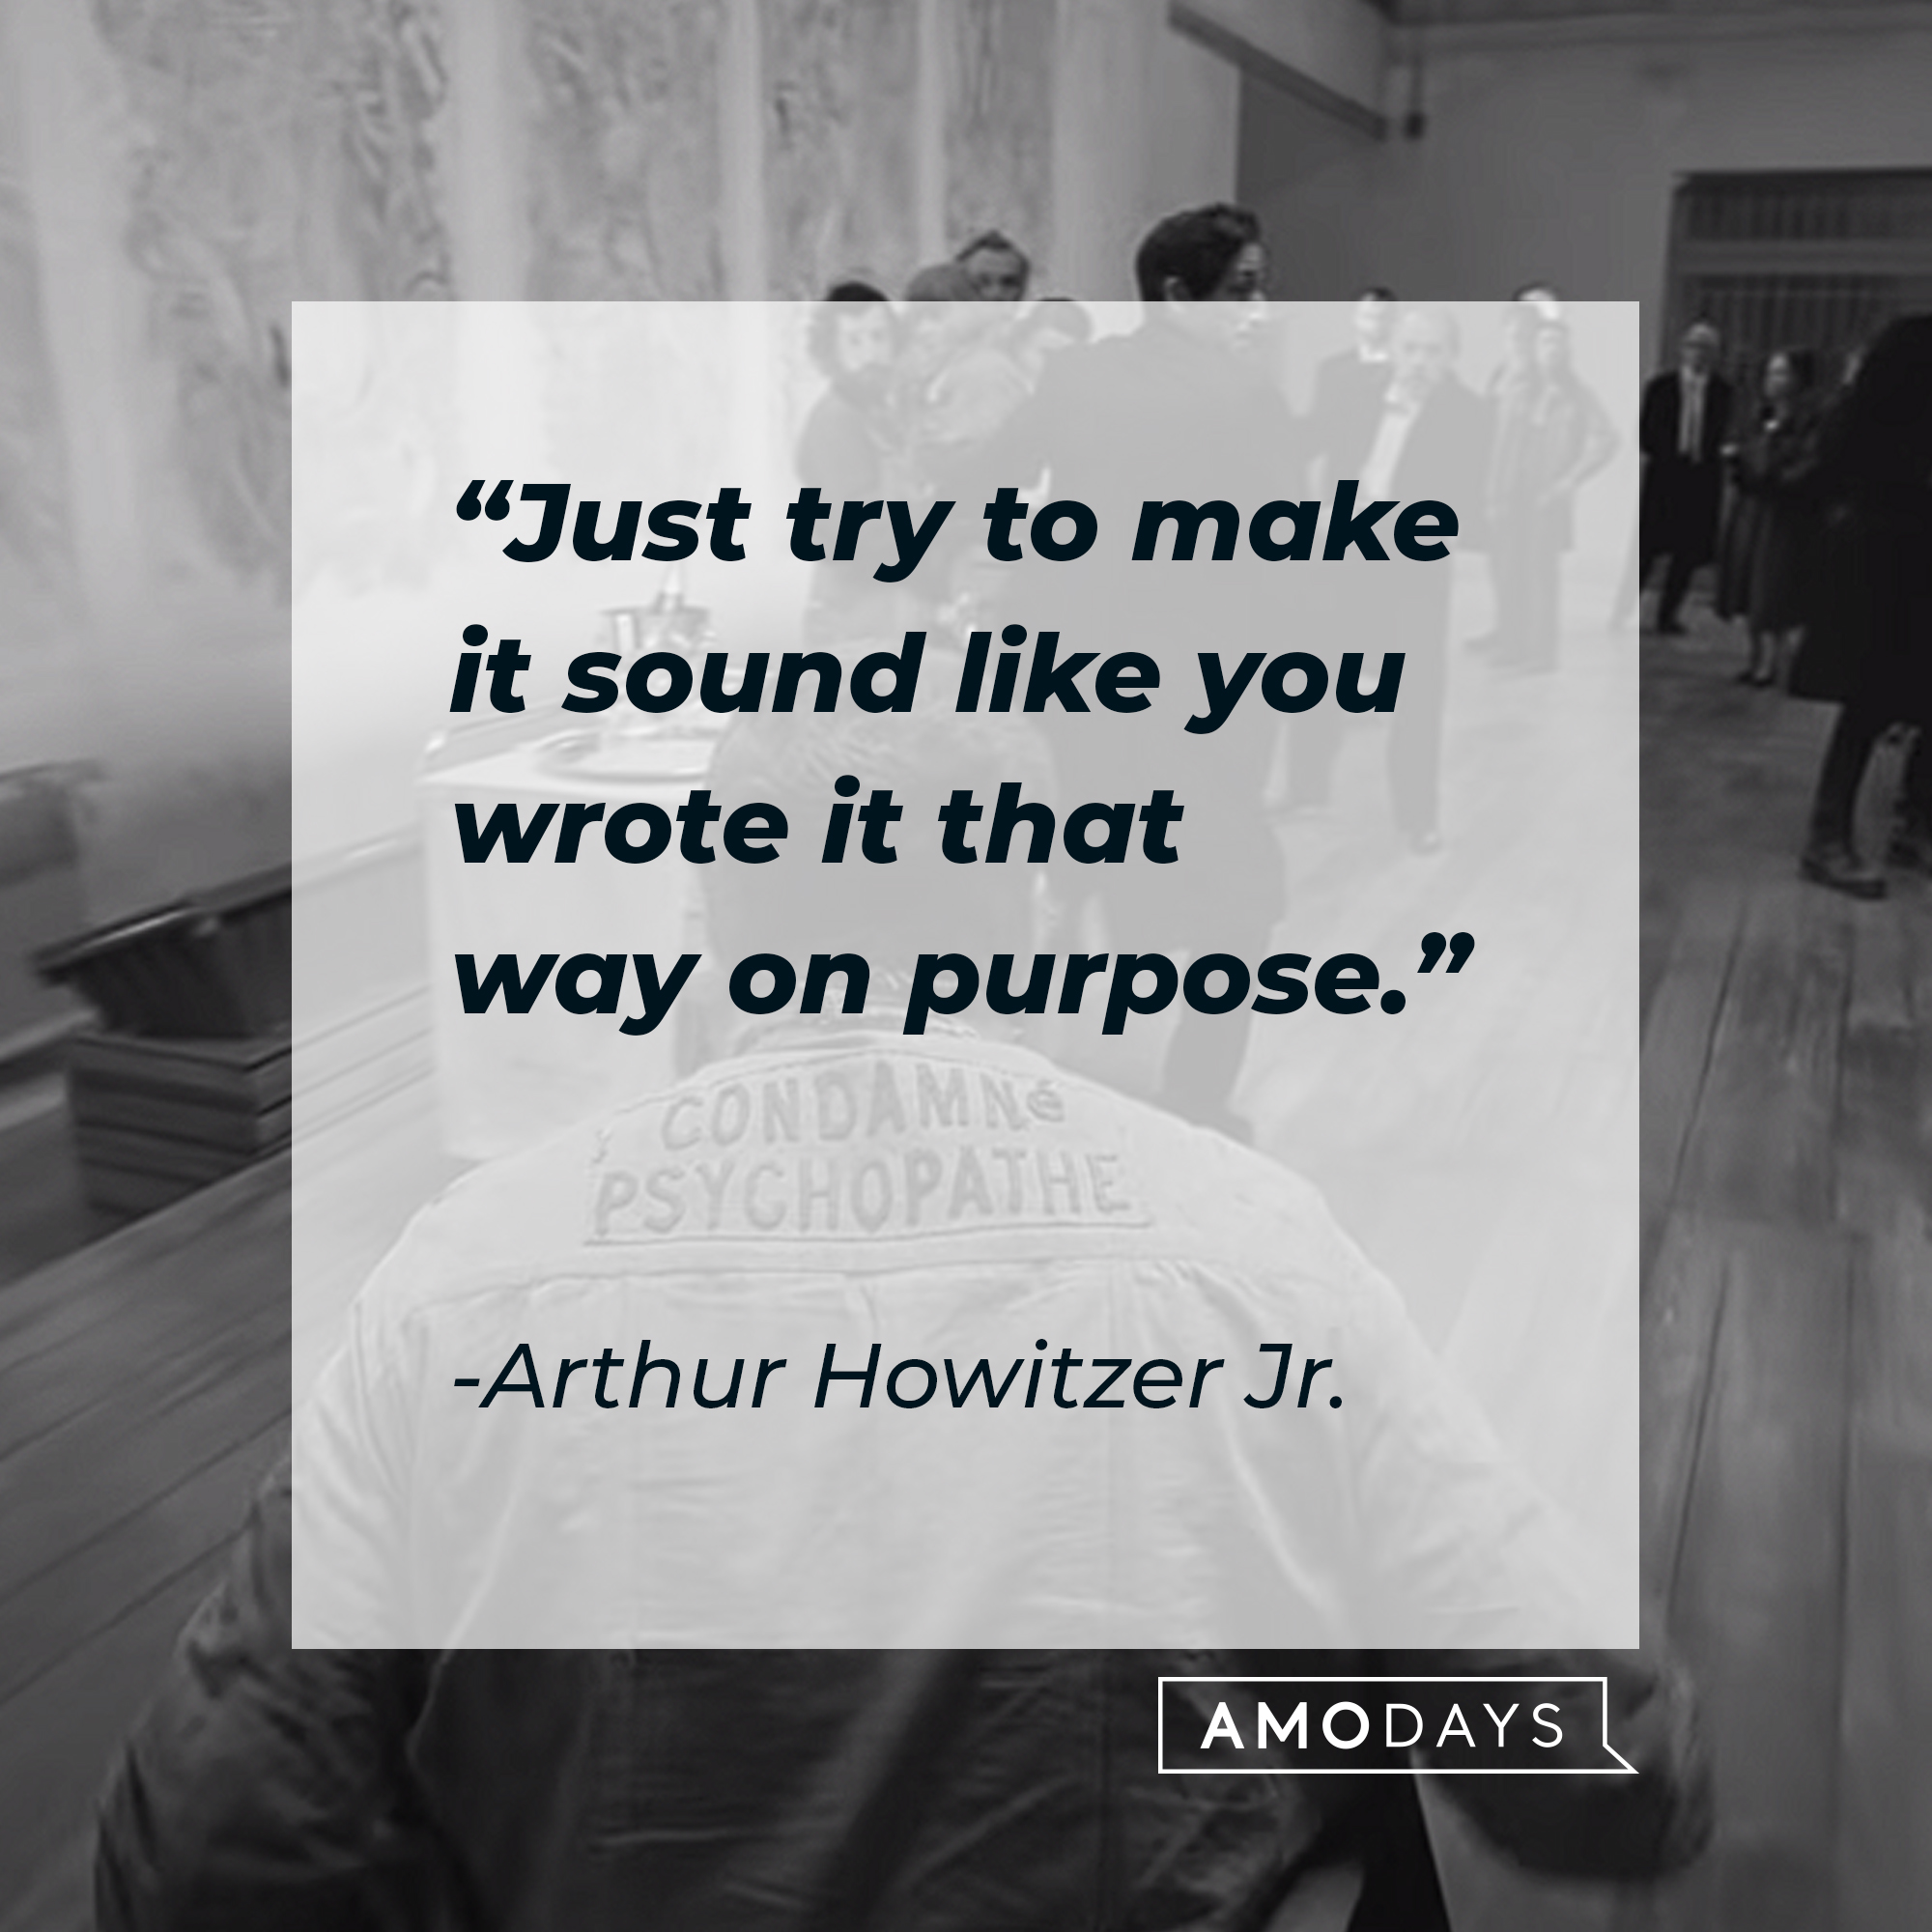 Arthur Howitzer Jr.'s quote: "Just try to make it sound like you wrote it that way on purpose." | Source: youtube.com/searchlightpictures